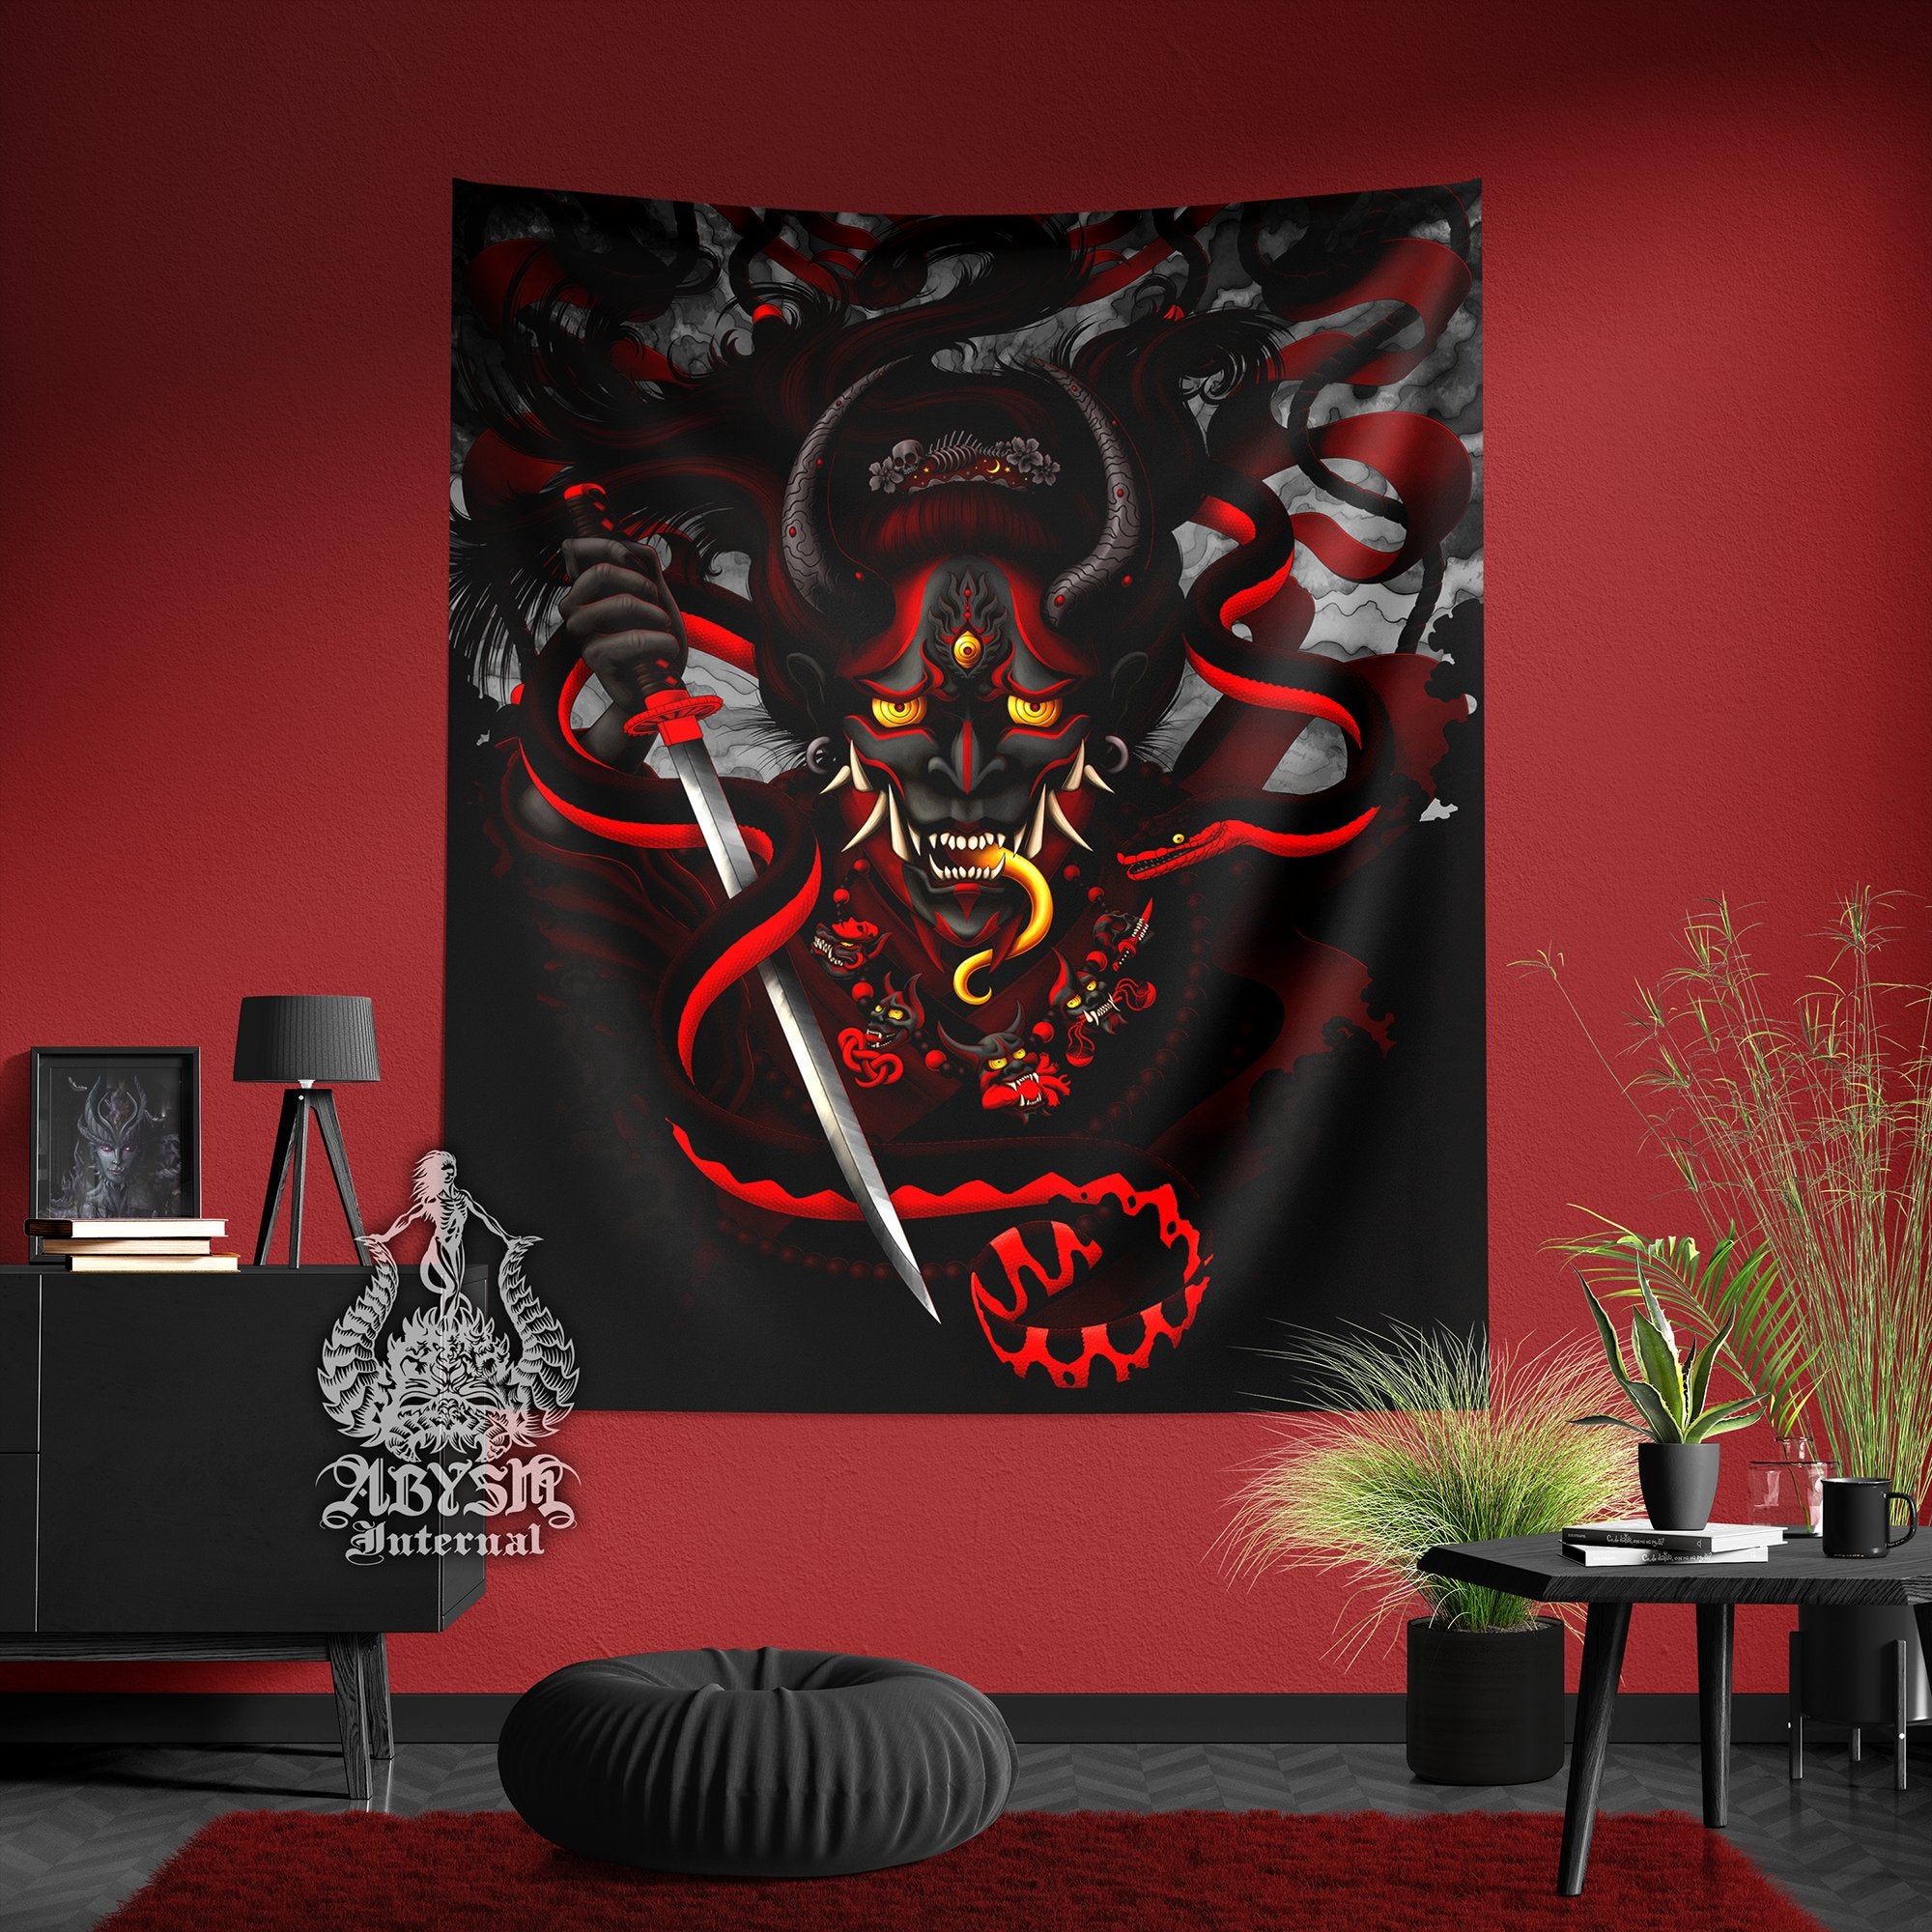 Gothic Demon Tapestry, Goth Japanese Hannya and Snake Wall Hanging, Manga, Anime and Gamer Room Decor, Vertical Art Print - Black red - Abysm Internal